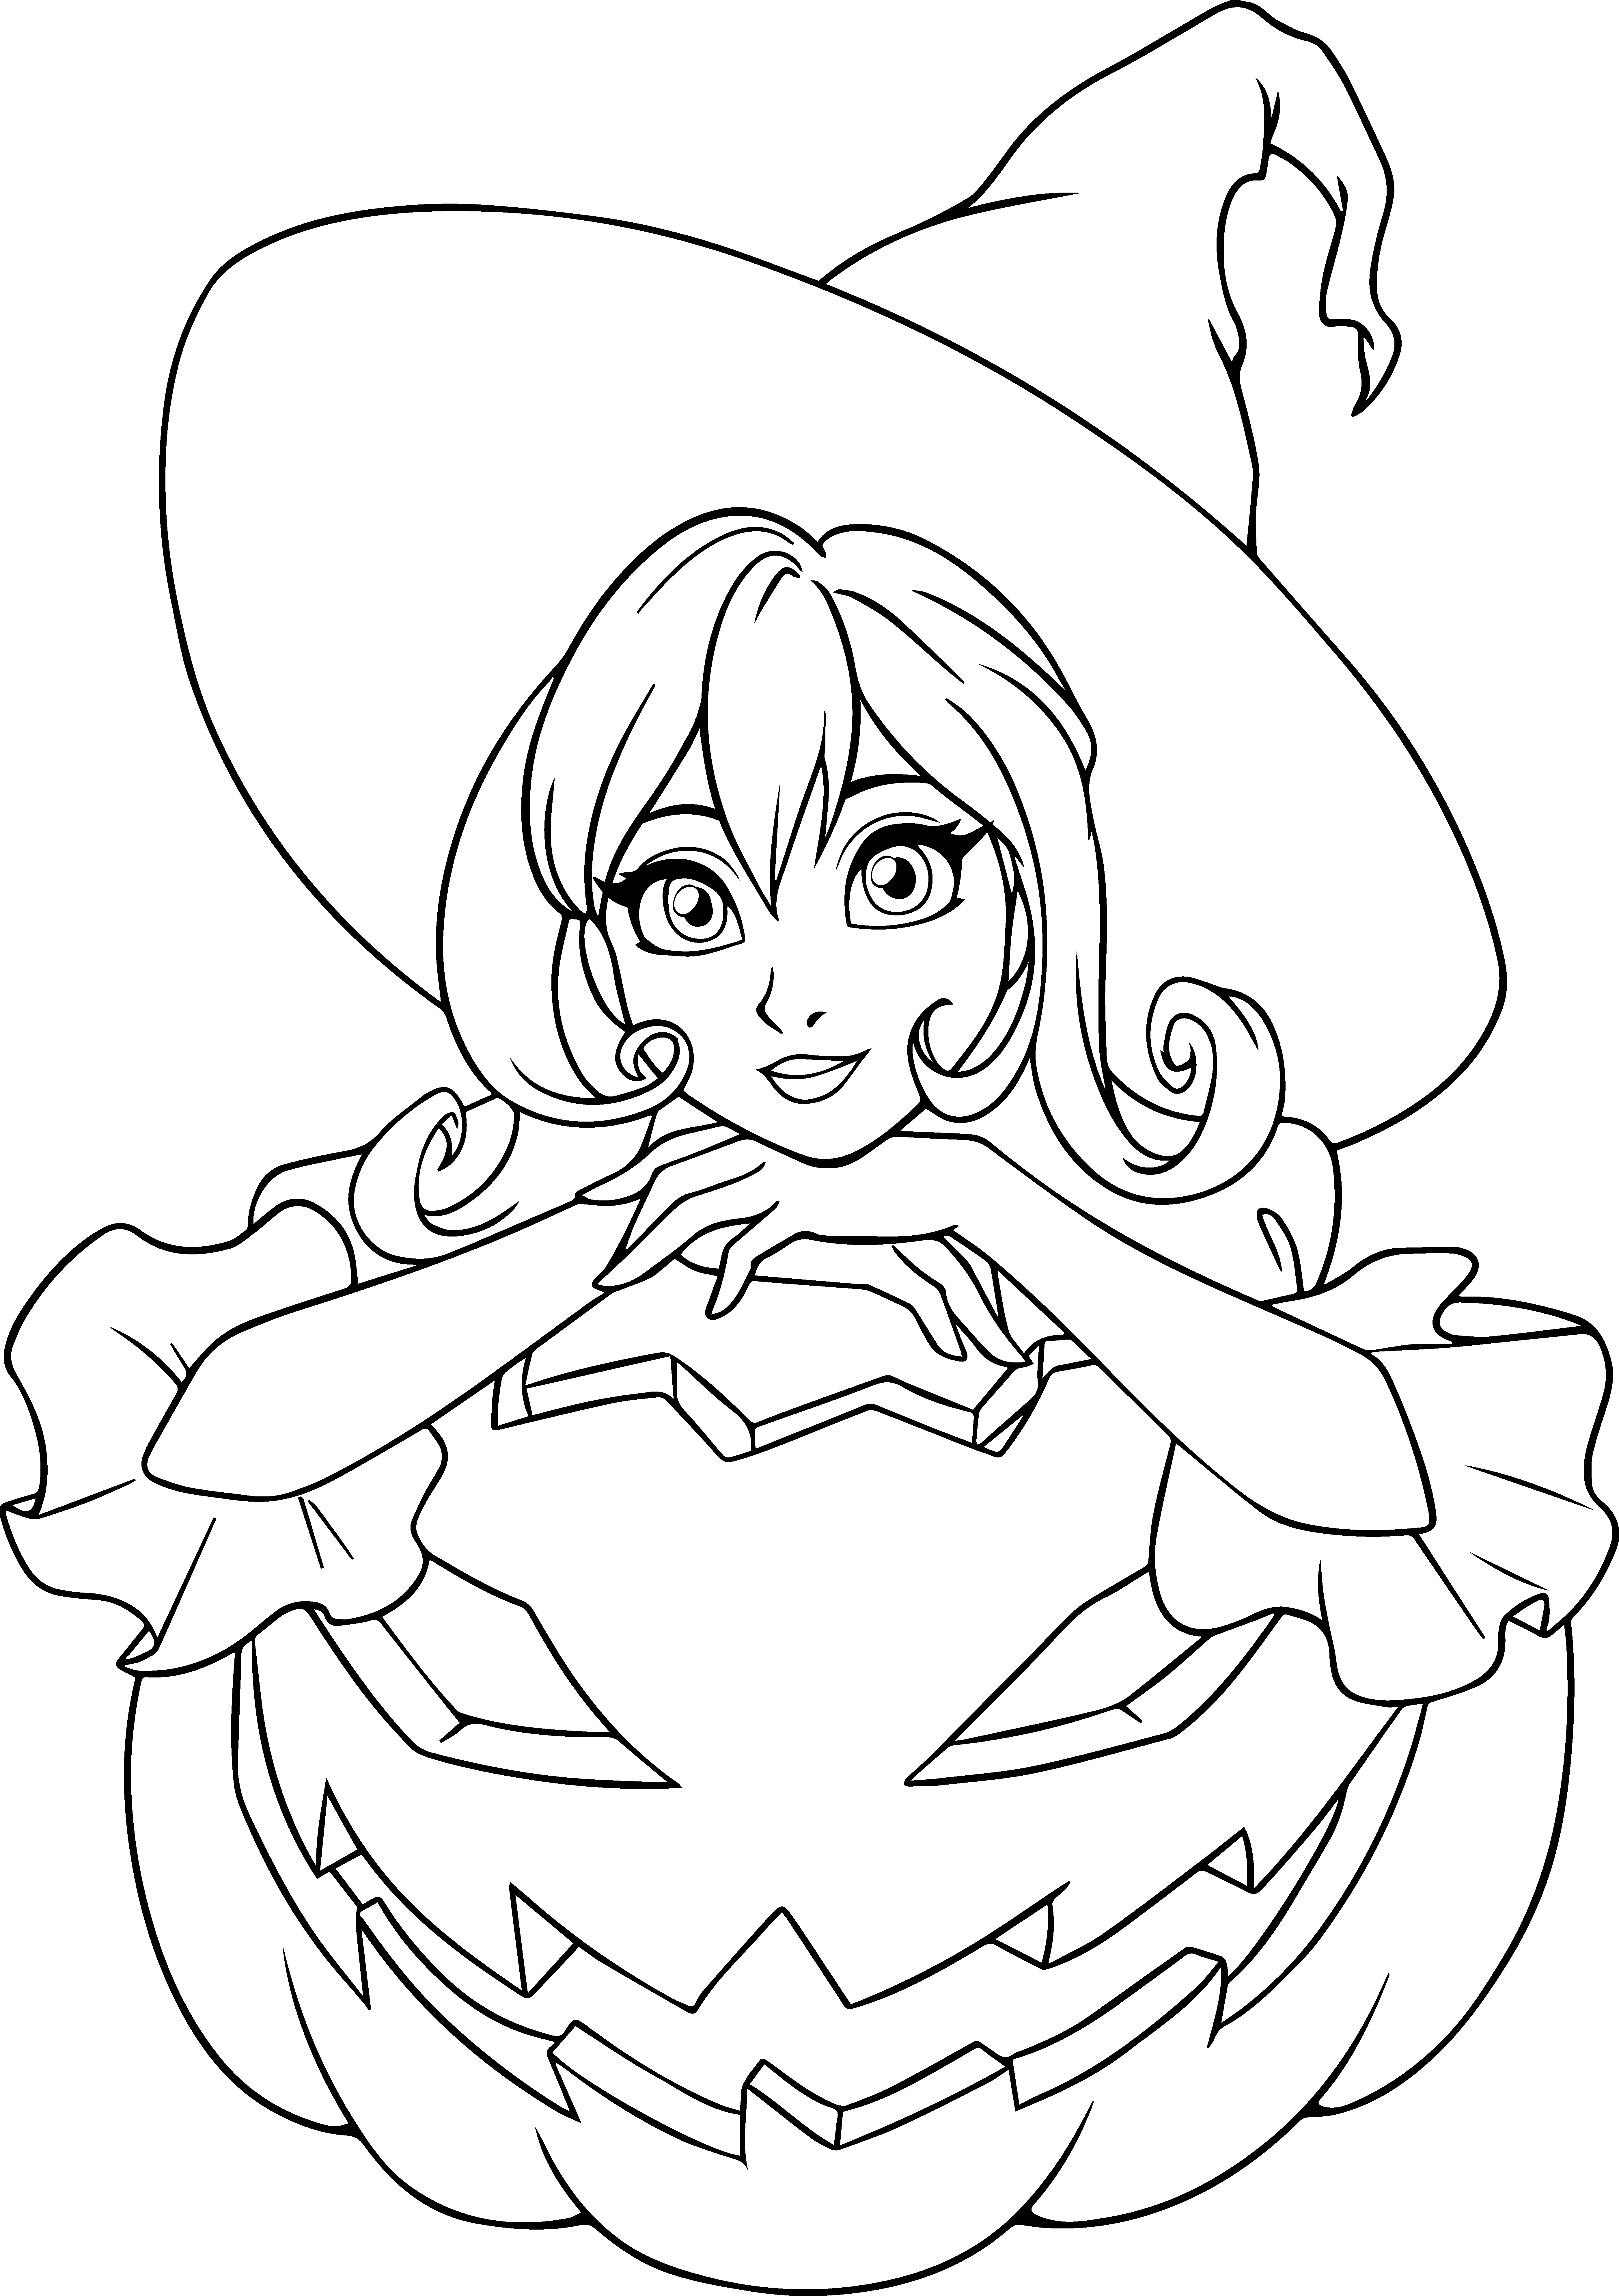 coloring pages of witches